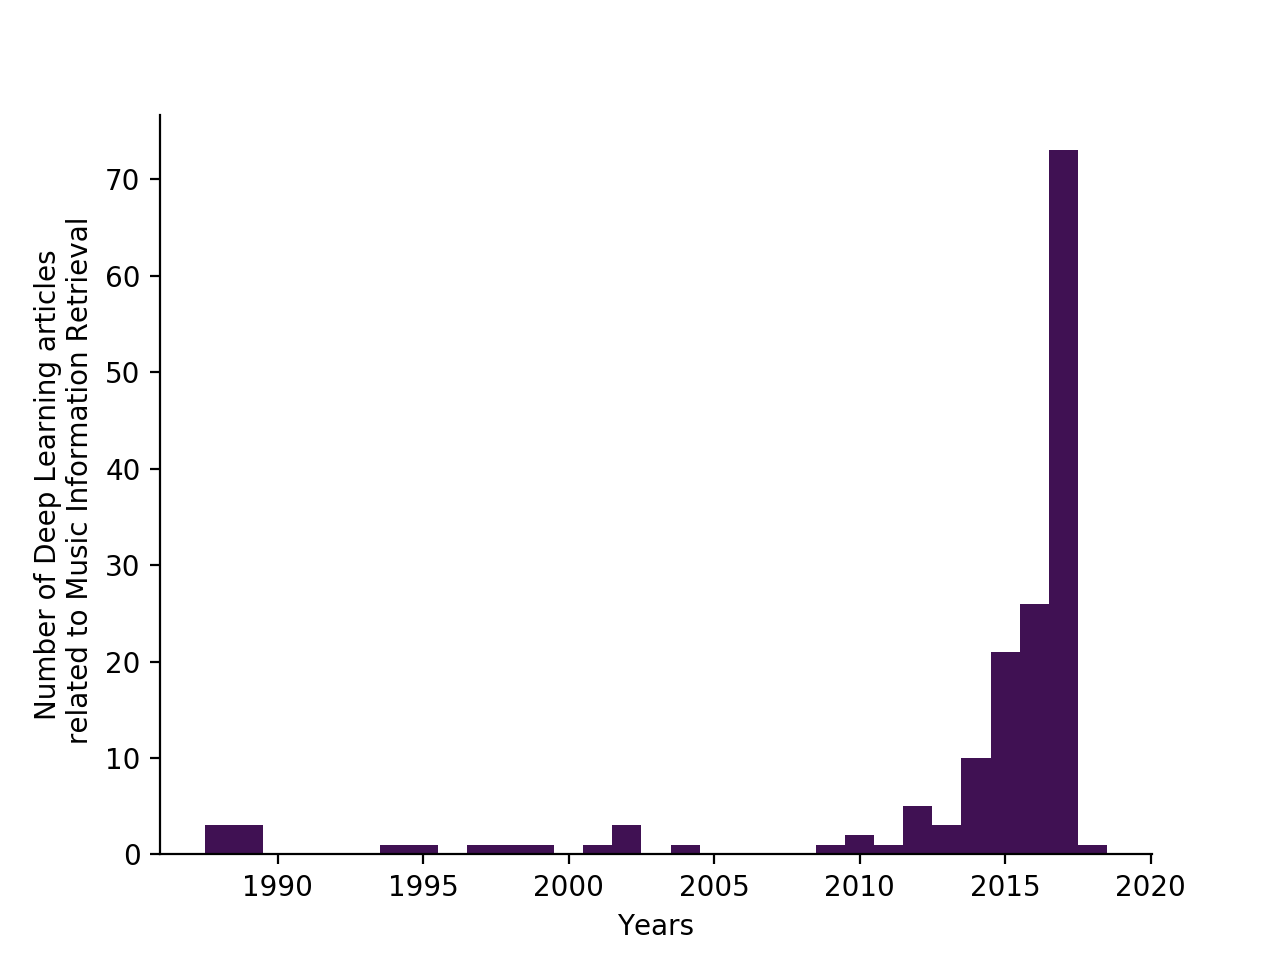 Number of articles per year